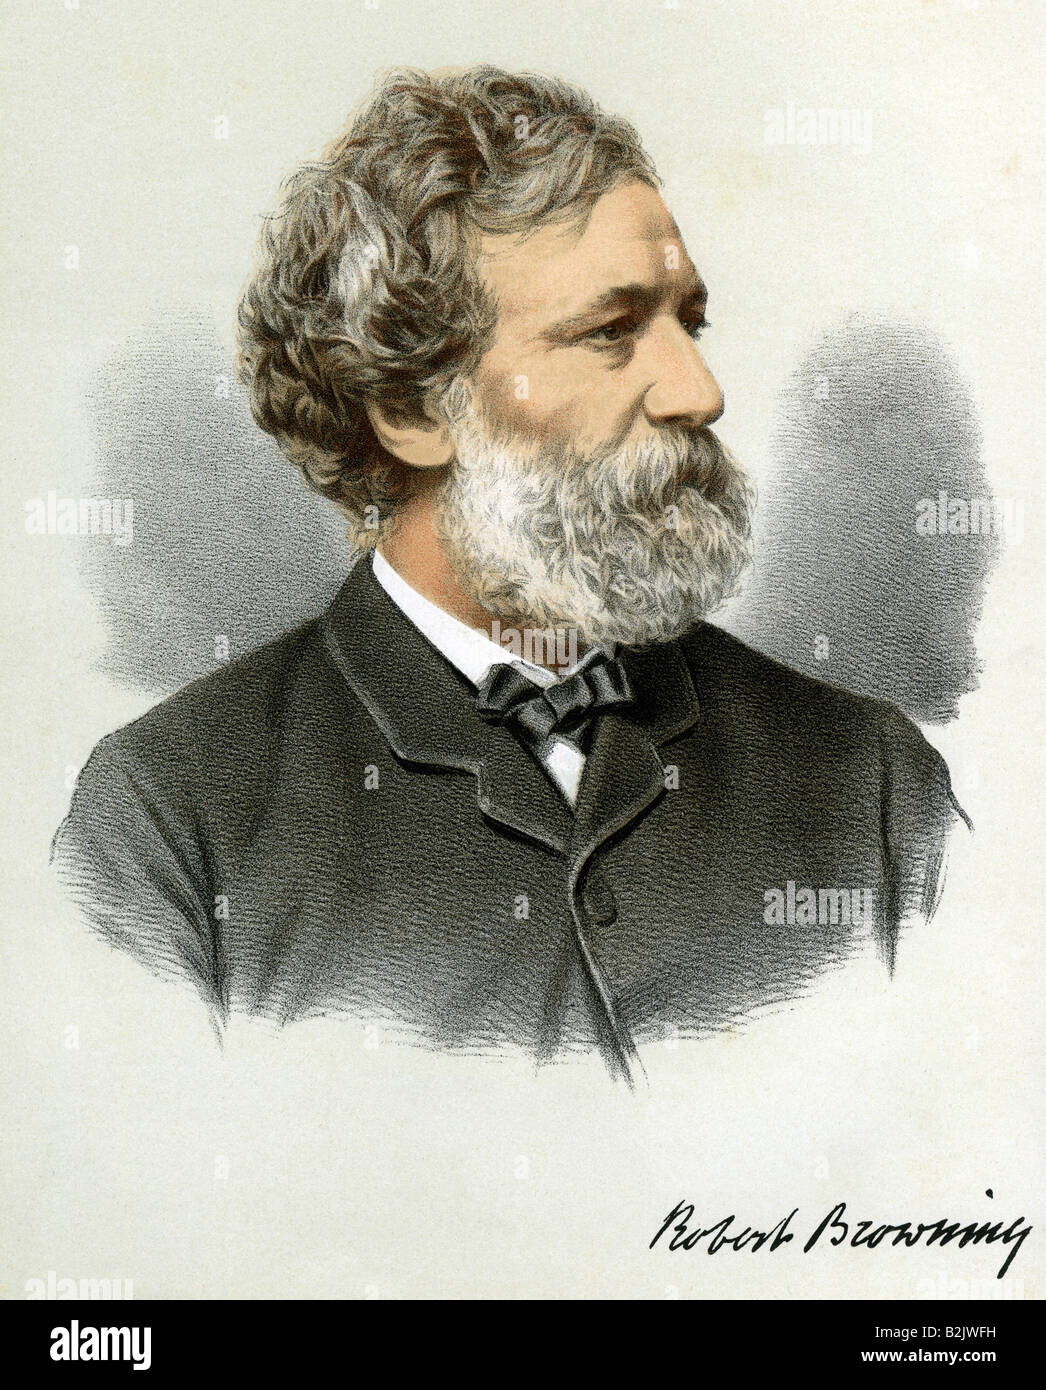 Browning, Robert, 7.5.1812 - 12.12.1889, English poet, portrait, lithograph, coloured, England, 19th century, Stock Photo